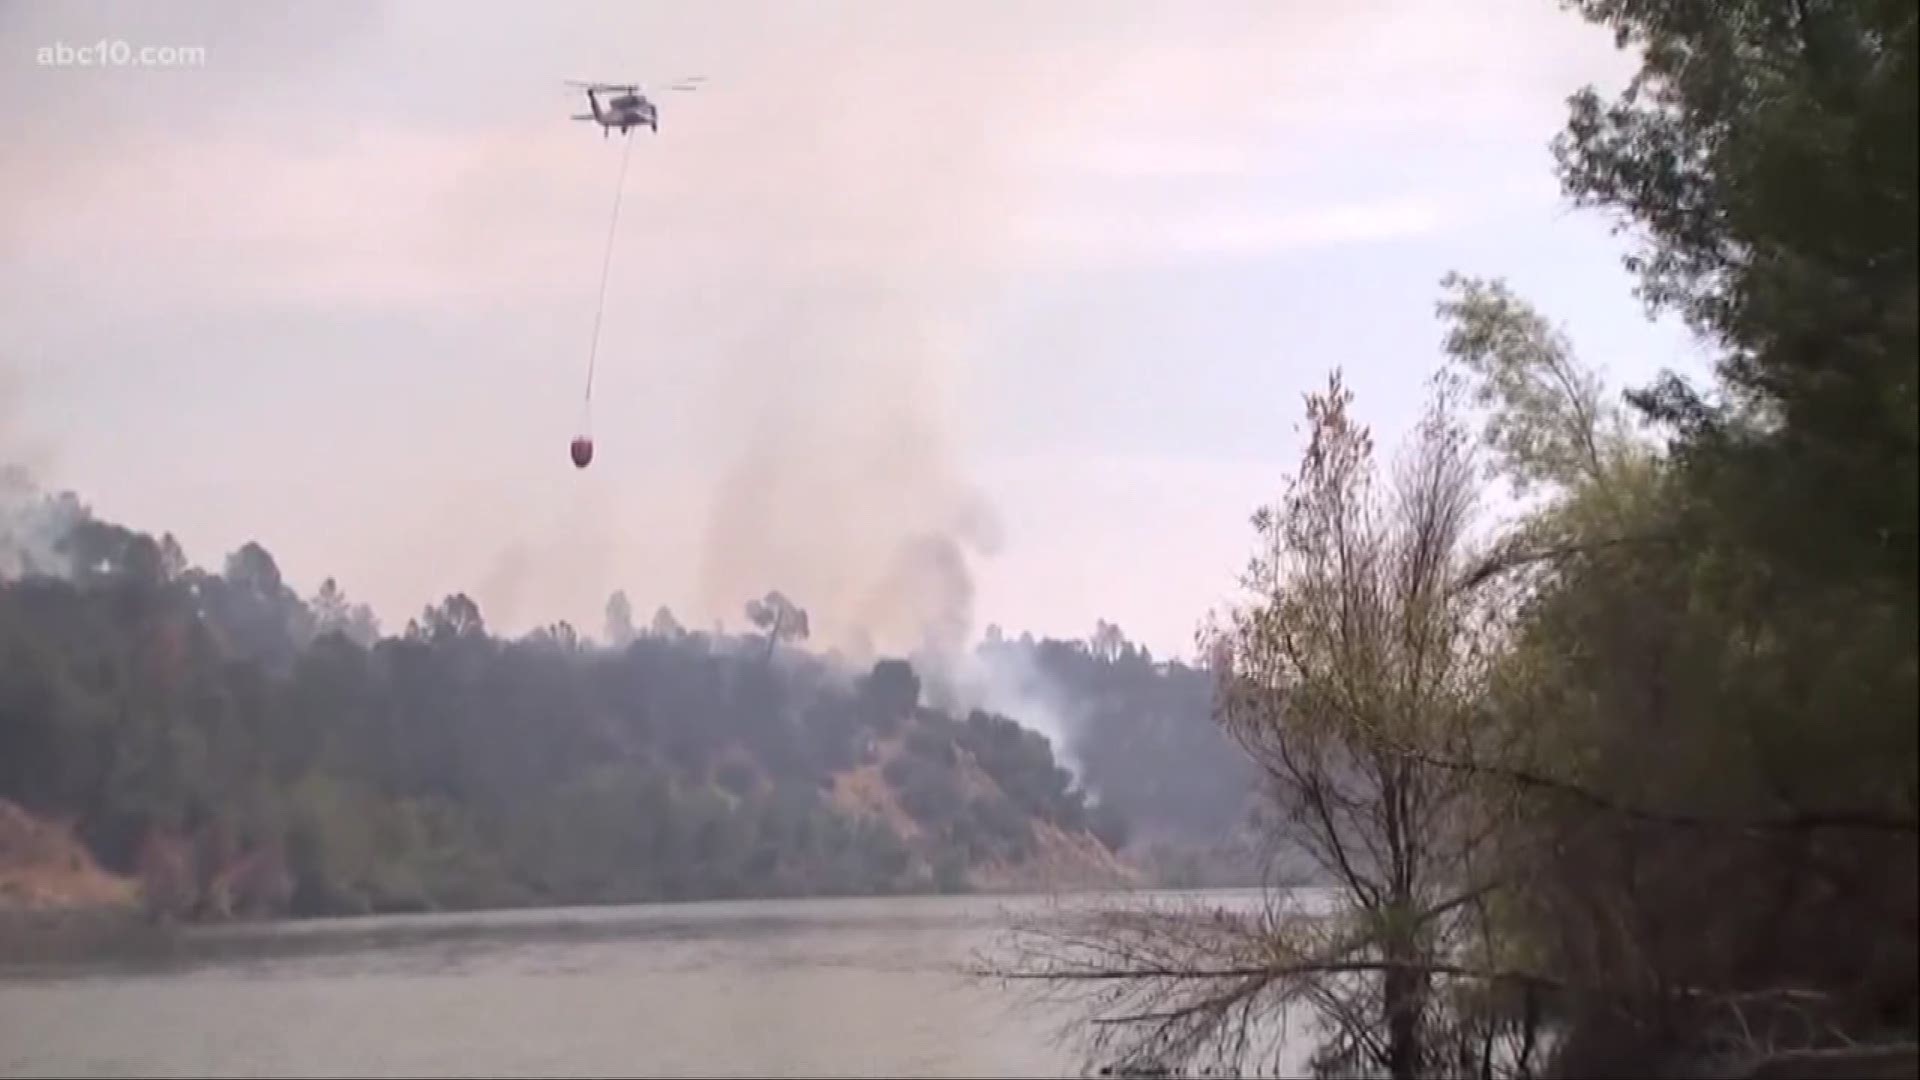 Snell Fire: All evacuation orders lifted near Lake Berryessa.